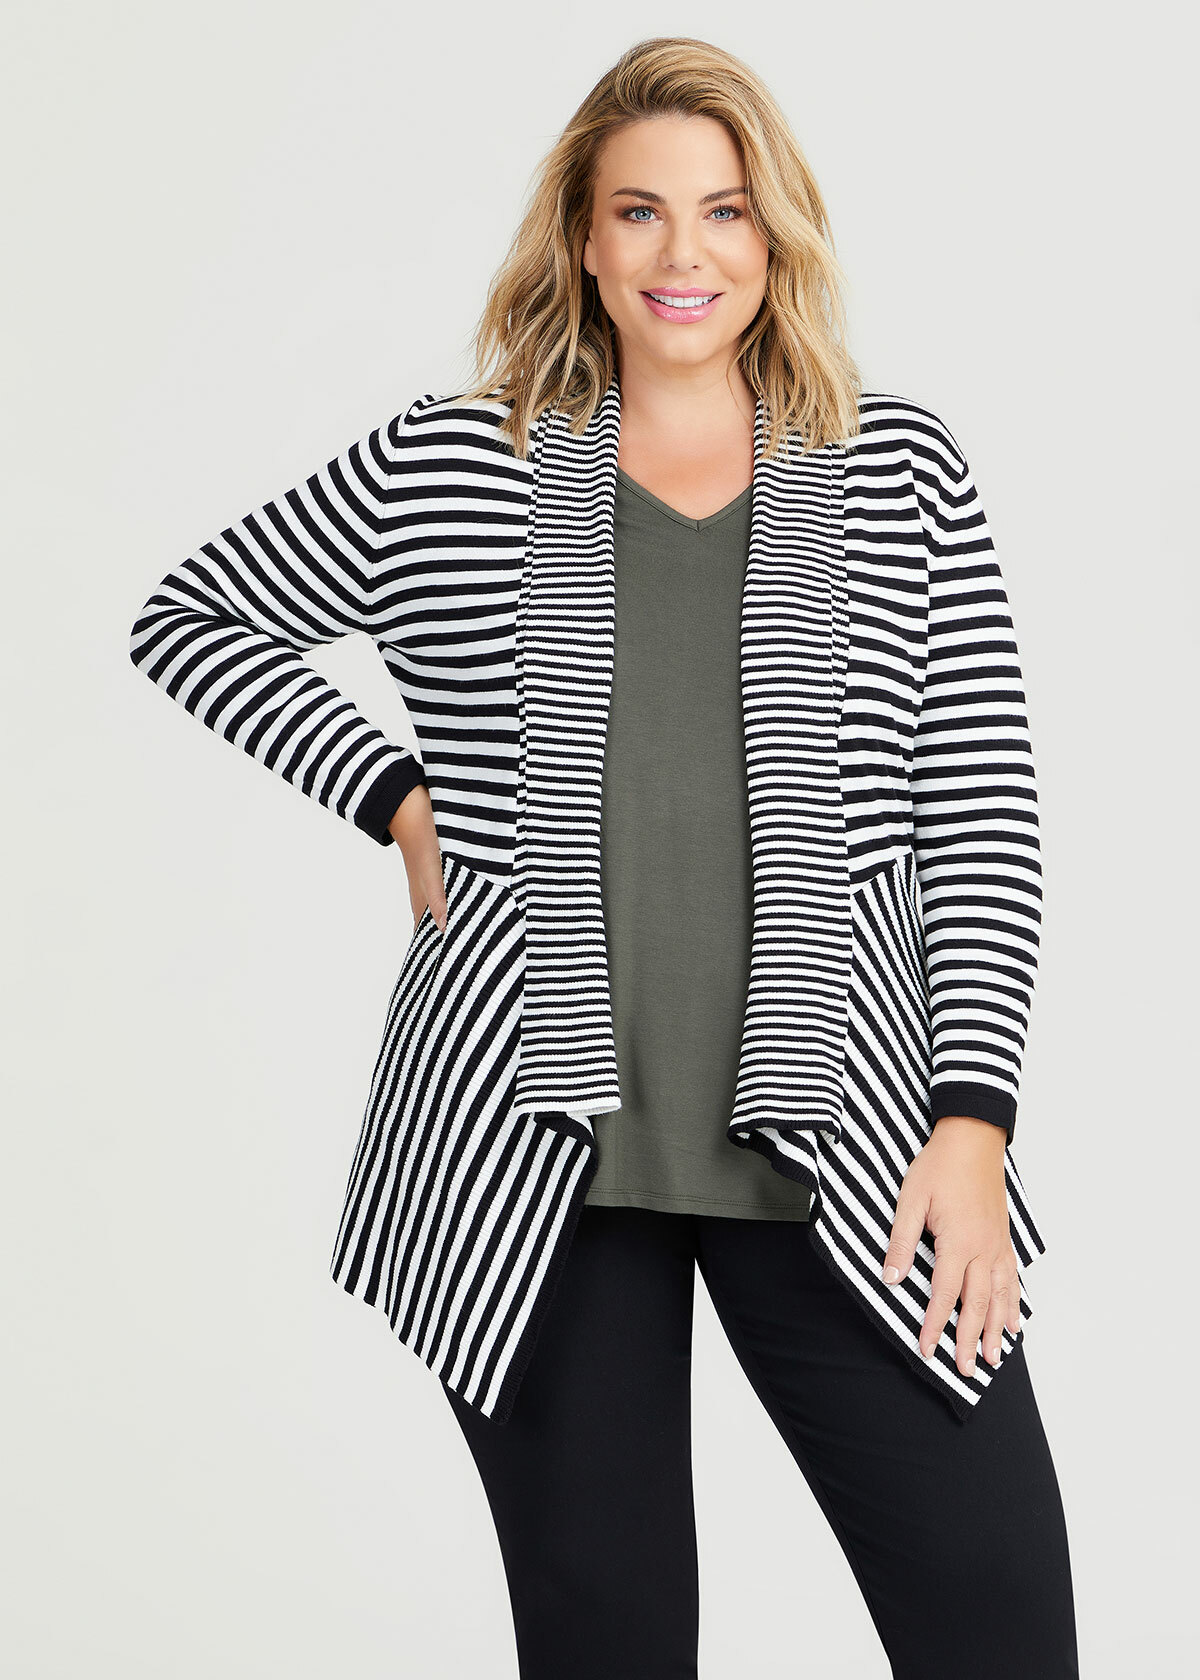 Shop Plus Size Everyday Claire Cardigan in Black | Sizes 12-30 | Taking ...